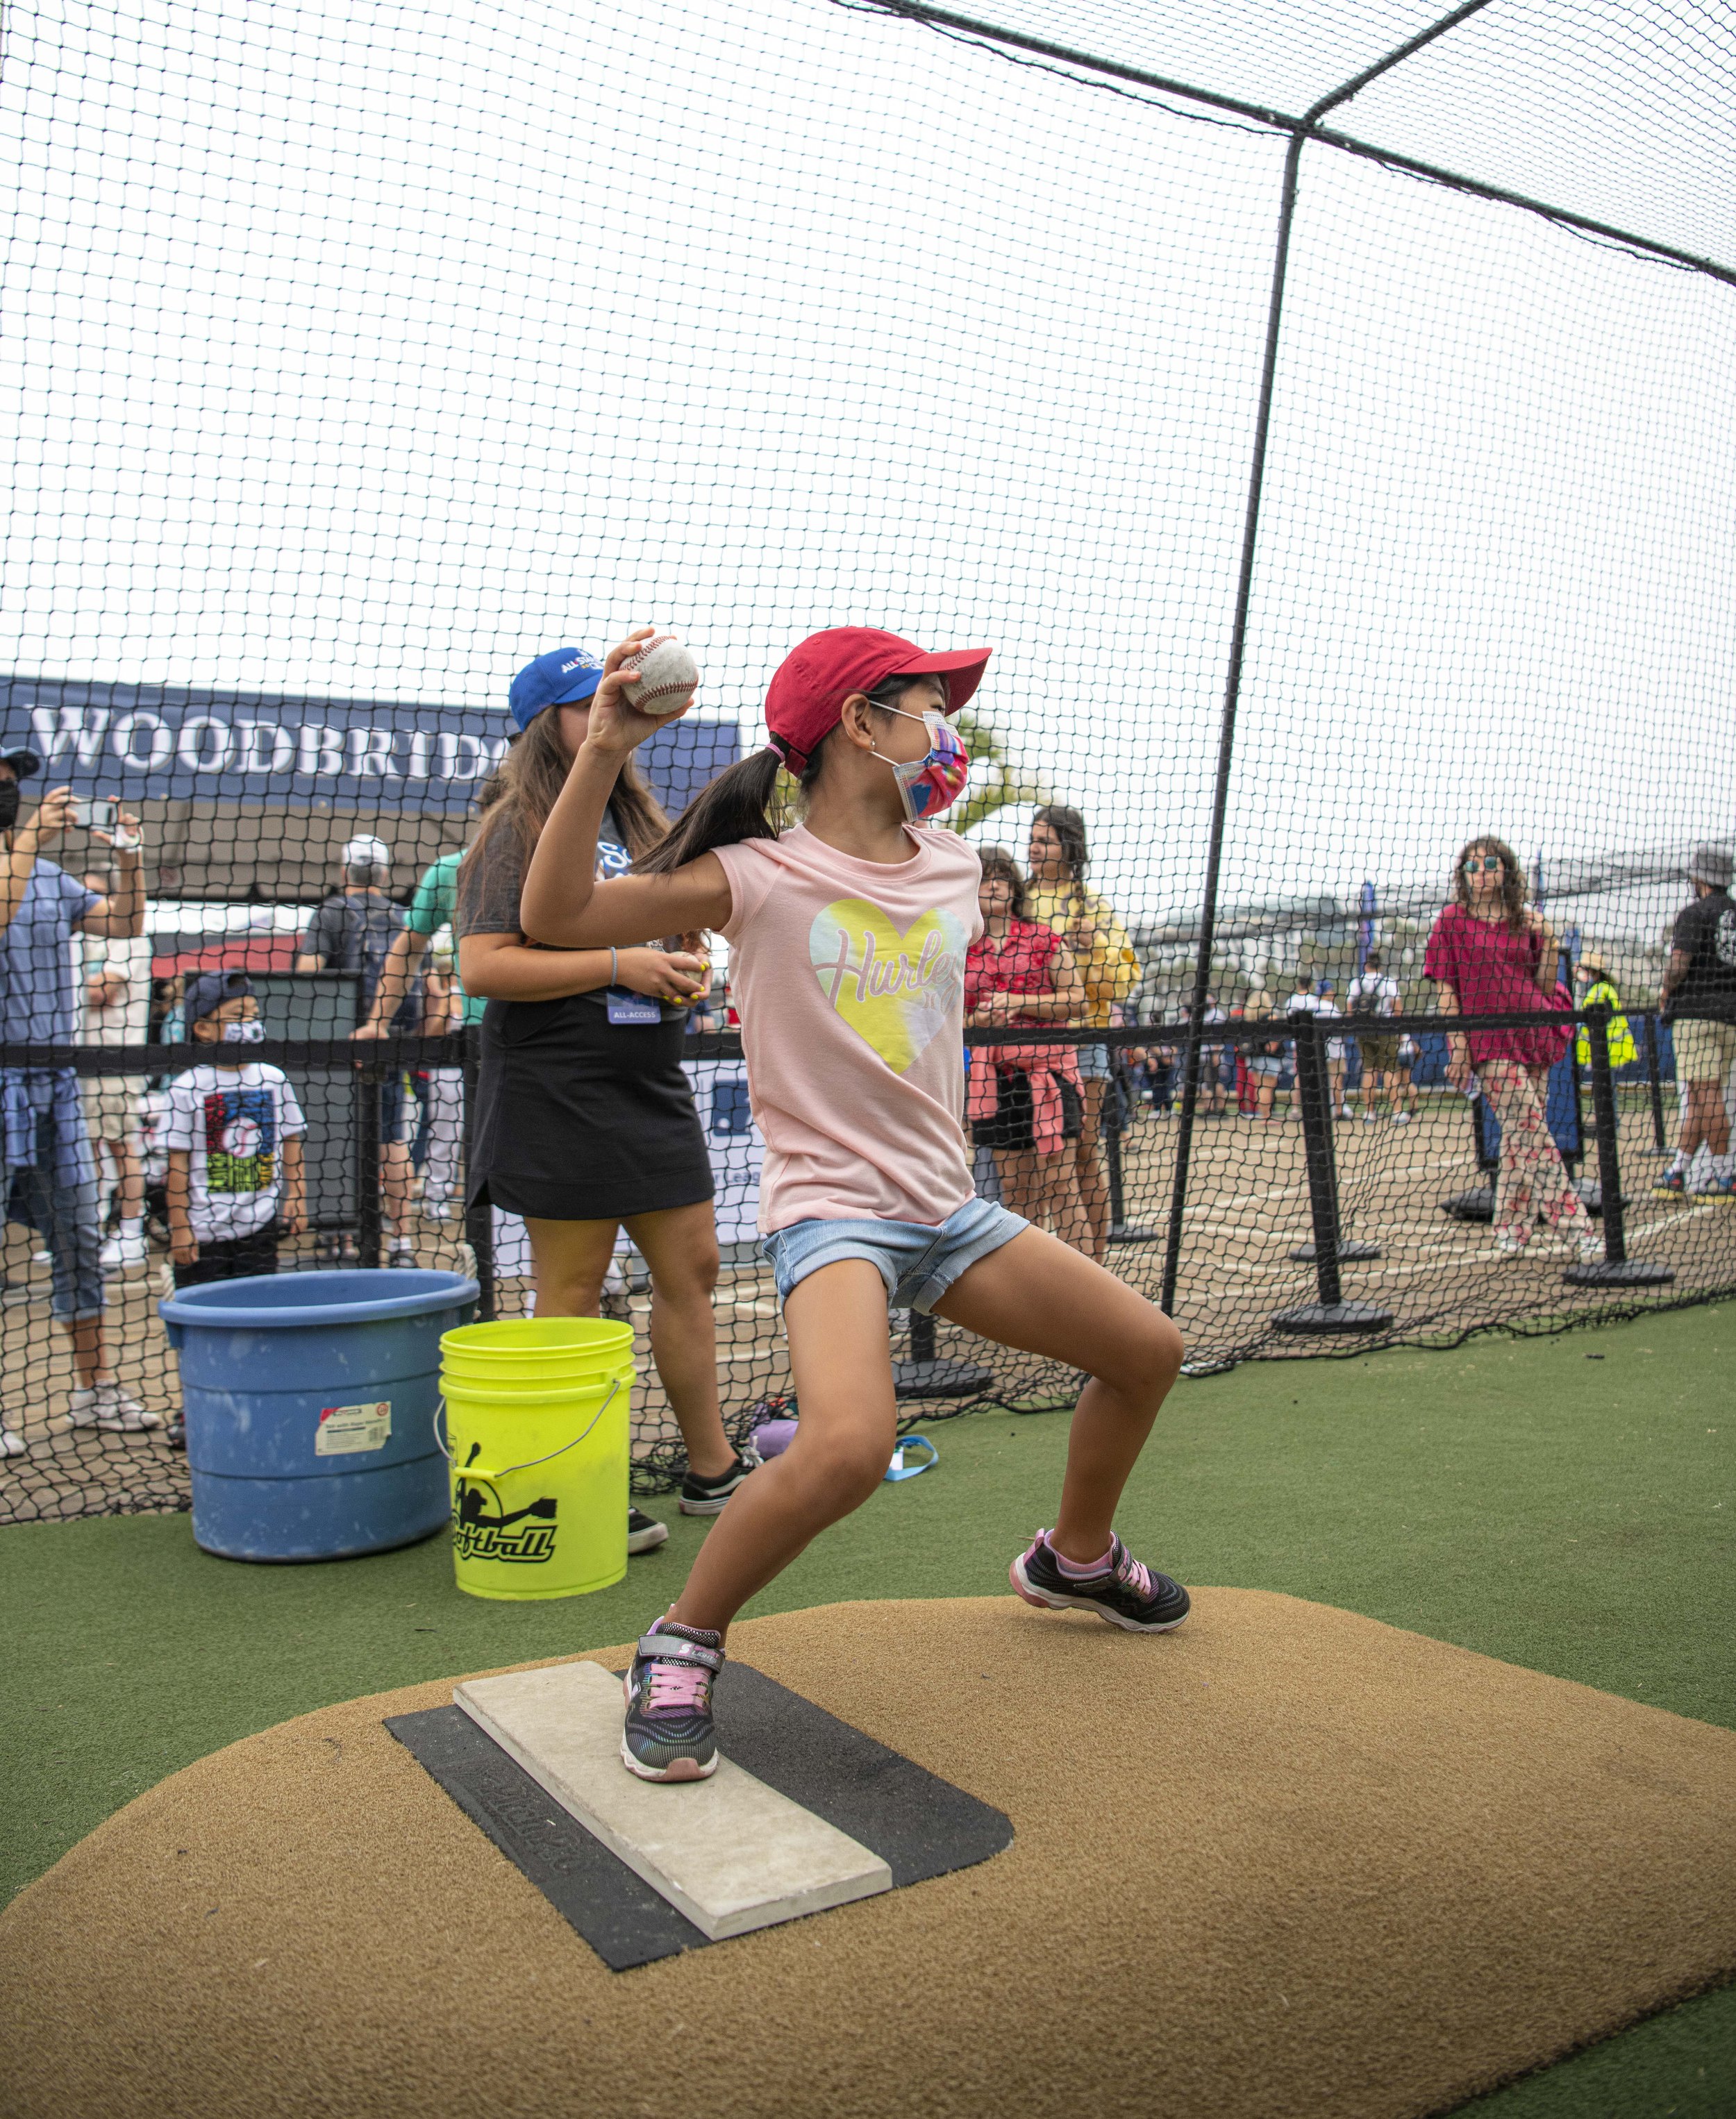  A young tourist from China gives it her all throwing a pitch at the Radar tent to check how fast participants could throw. (Jon Putman | The Corsair) 